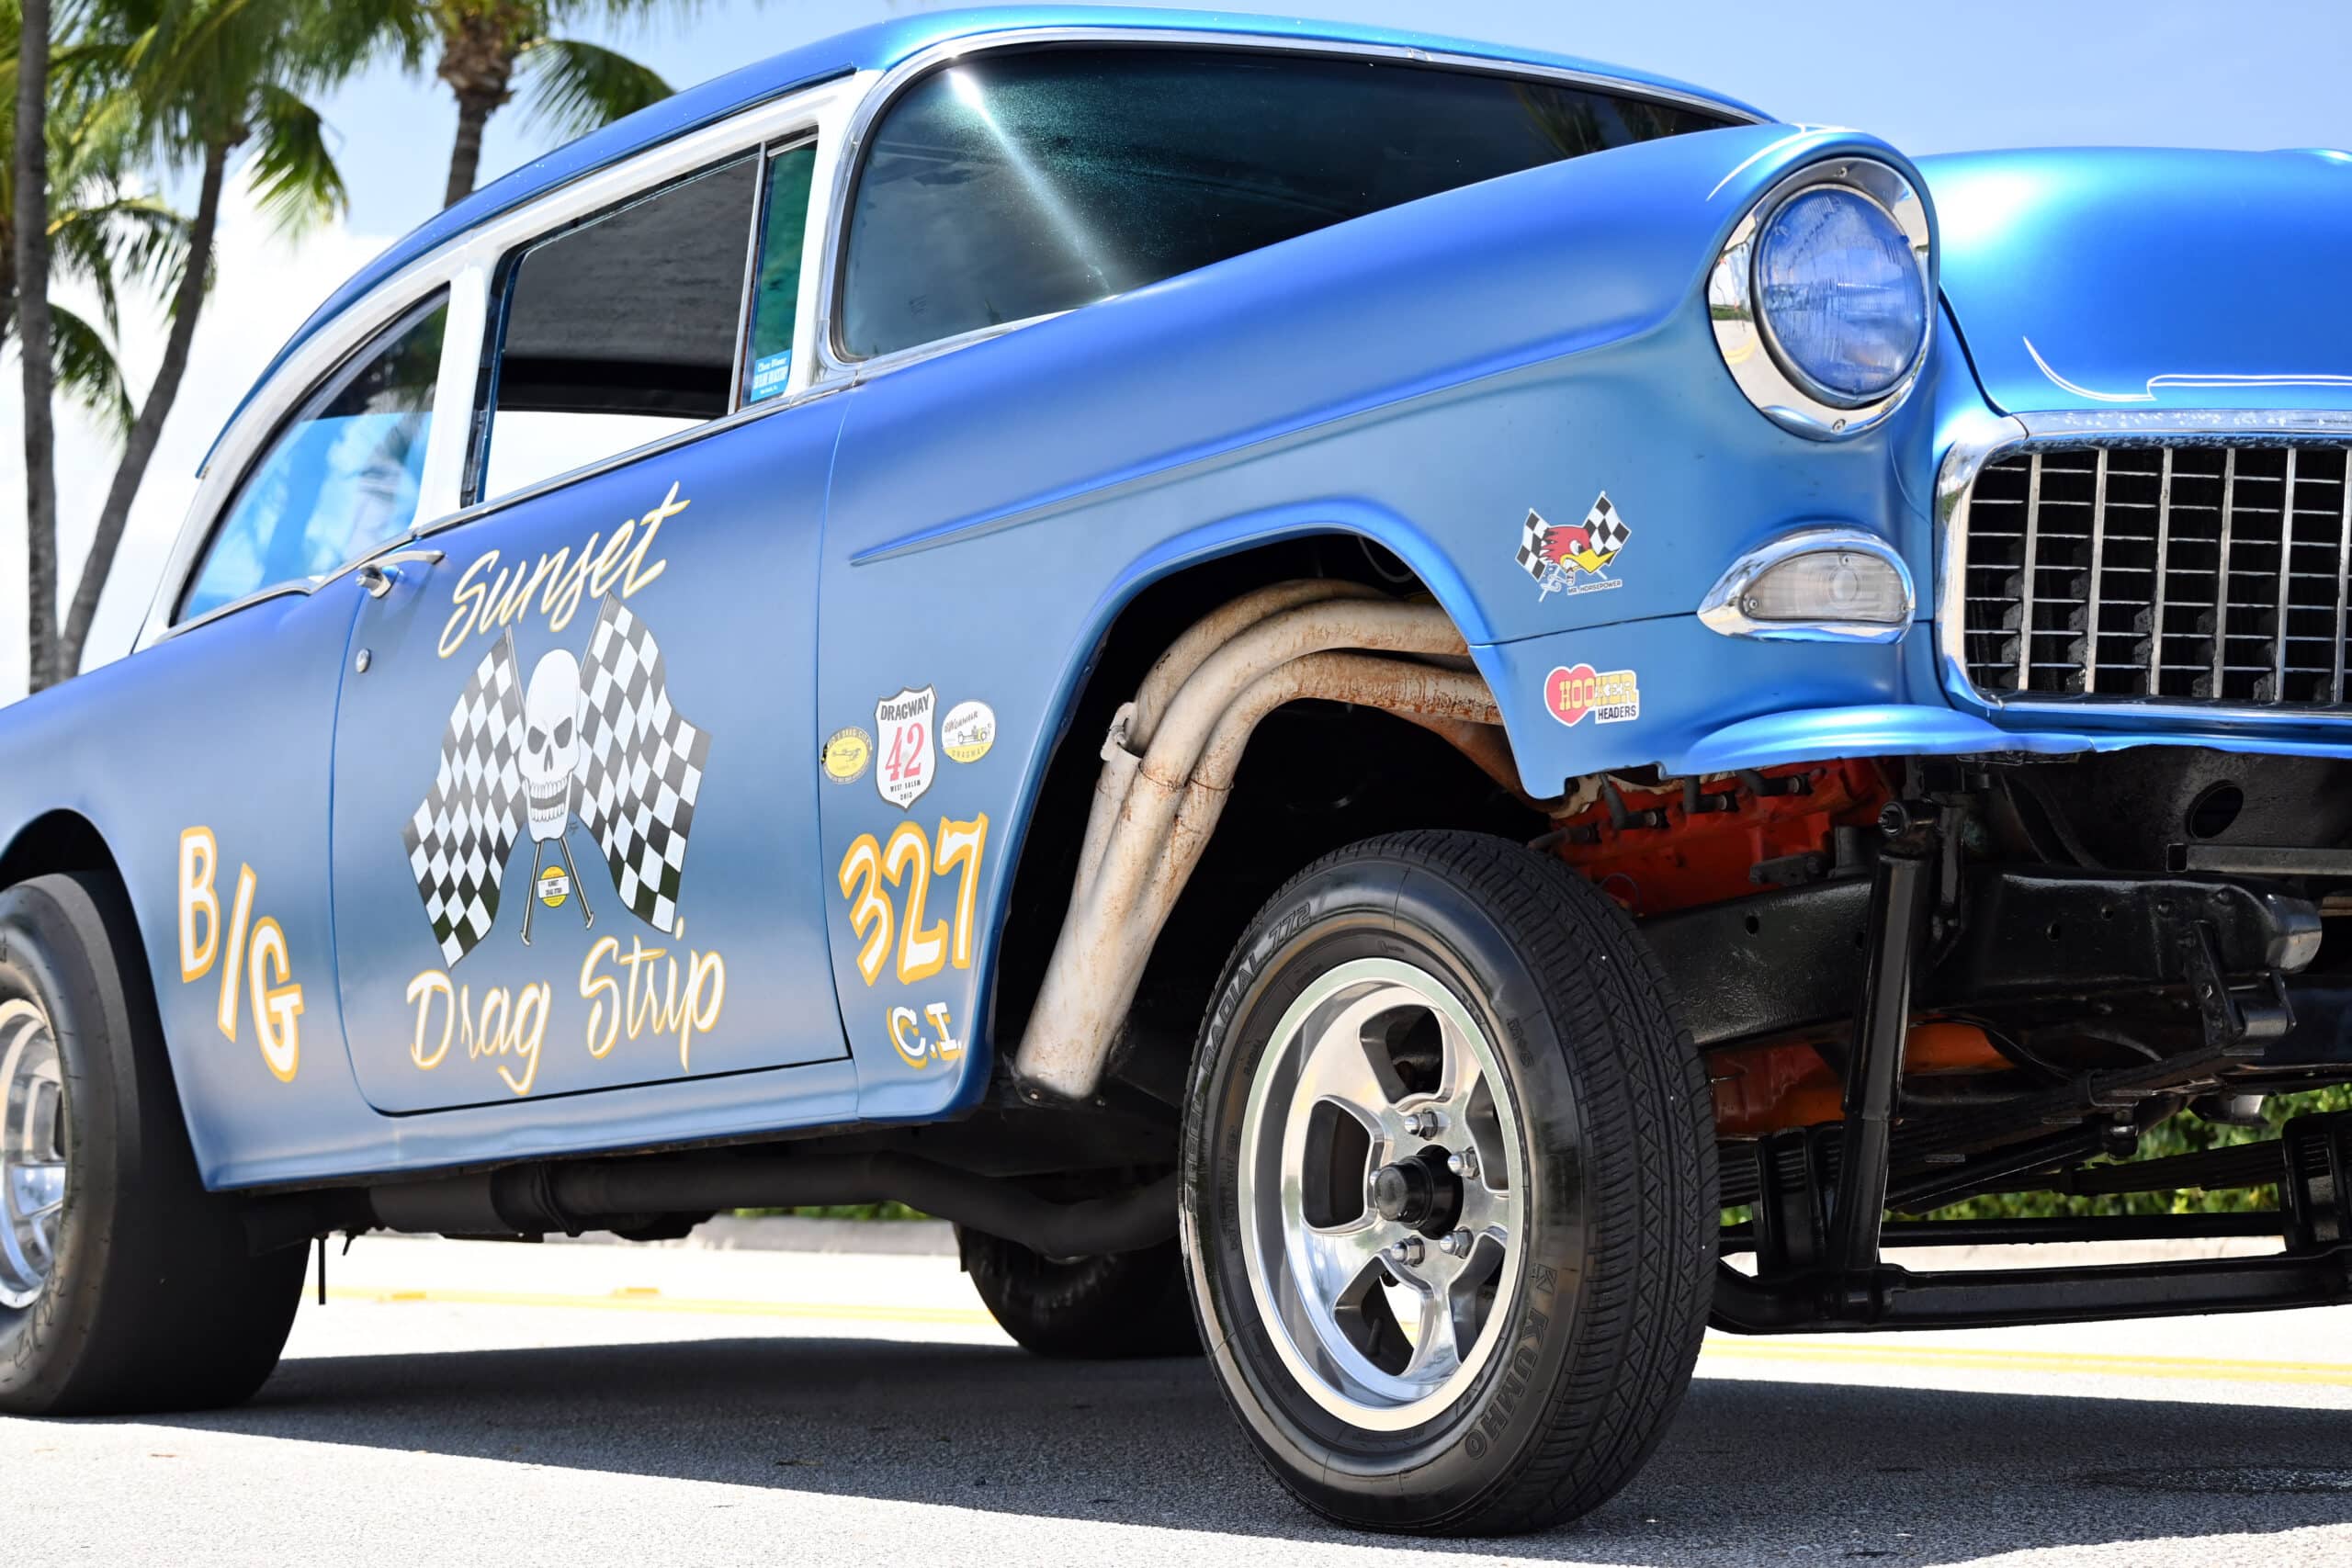 1955 Chevrolet 210 Old school “GASSER’’ 327 cubic inch and 4 speed Muncie transmission and 12 bolt posi diff – front disk brakes with corvette master cylinder